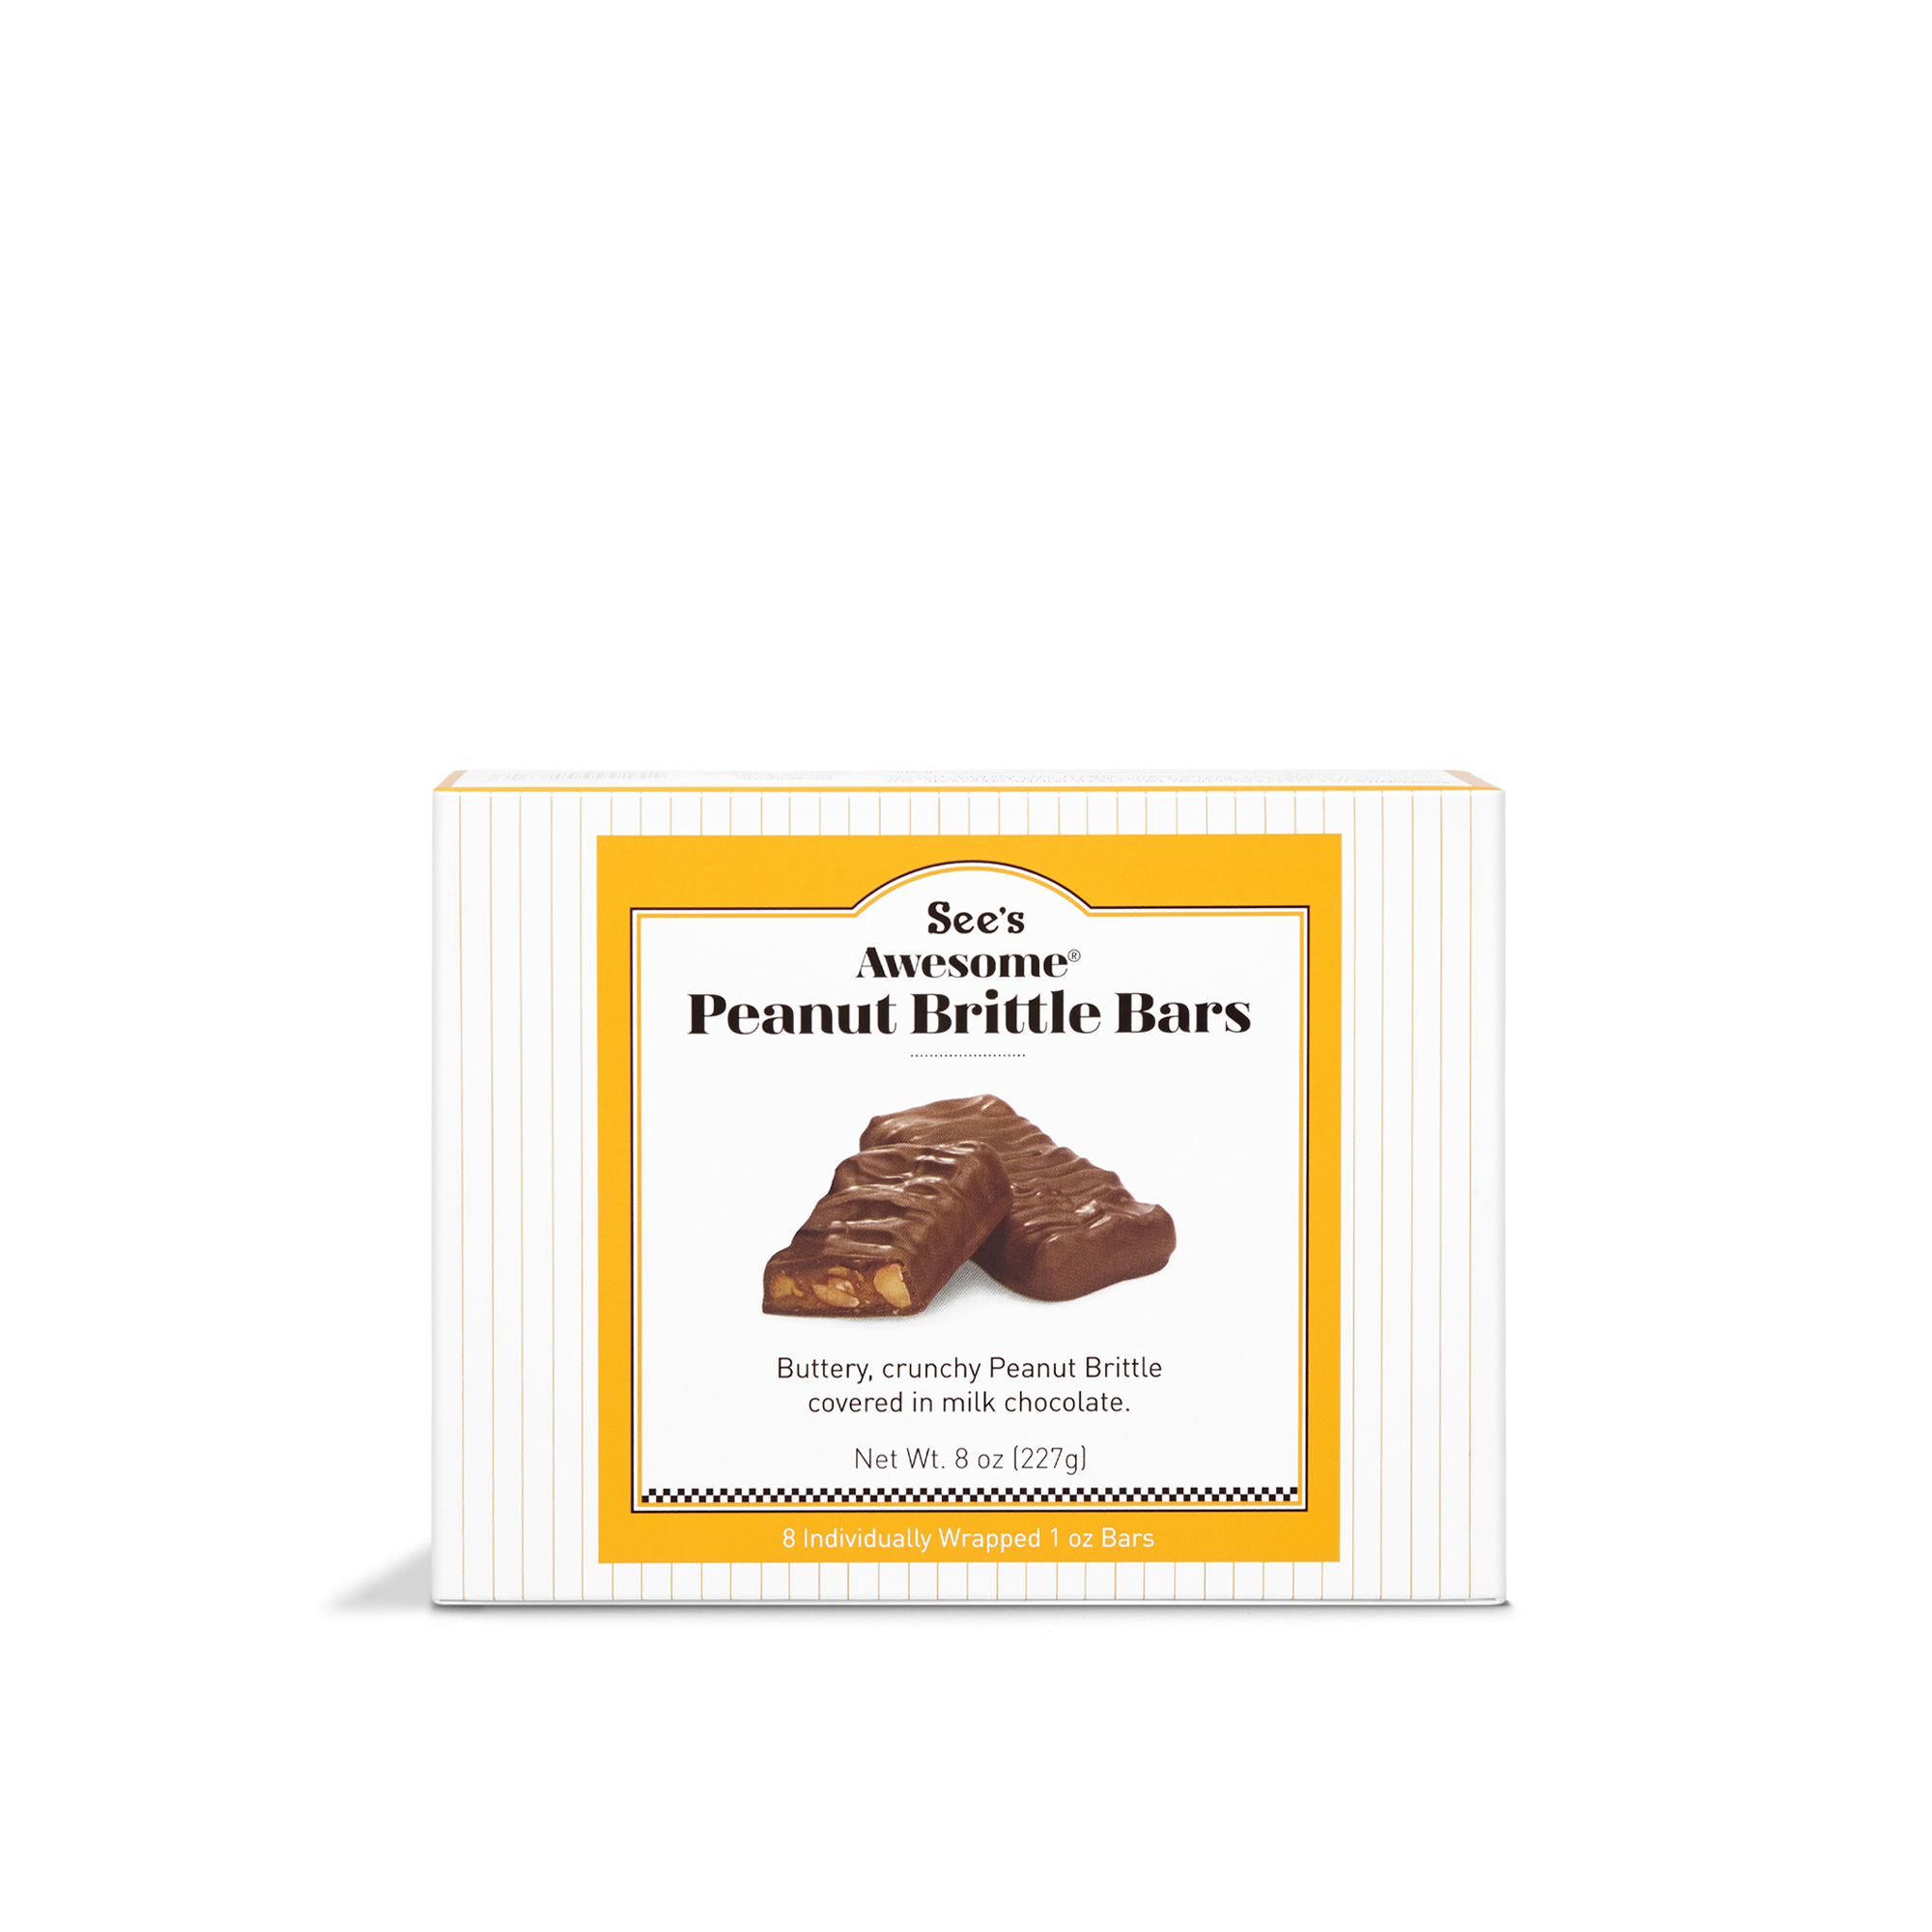 8 oz See's Awesome® Peanut Brittle Bars